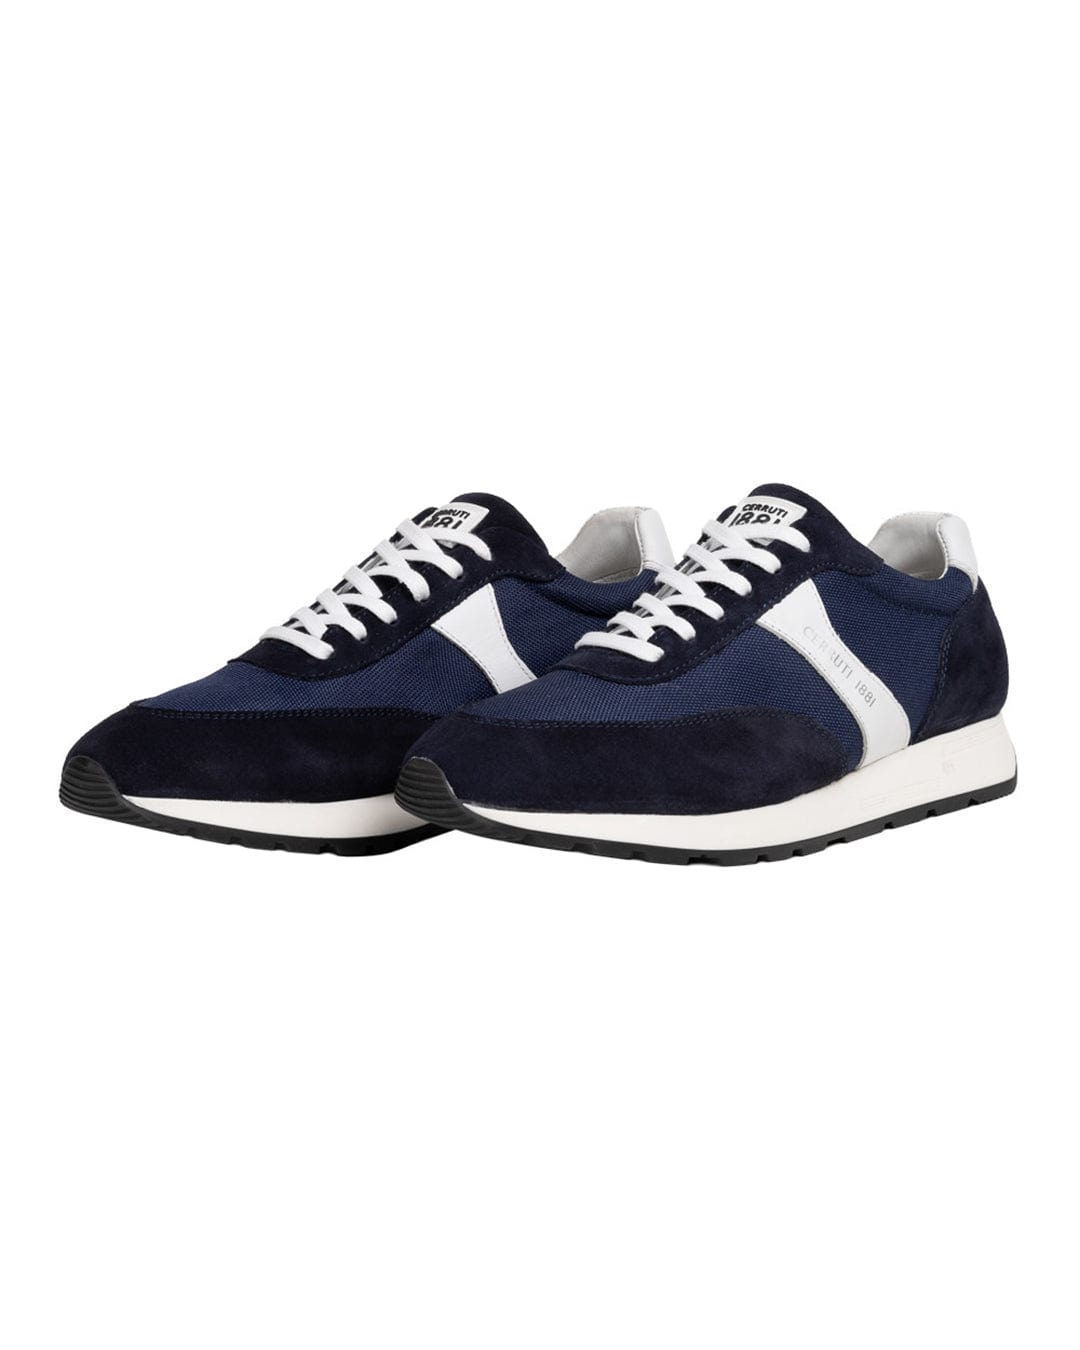 Cerruti Shoes Cerruti I88I Navy And White Leather Sneakers